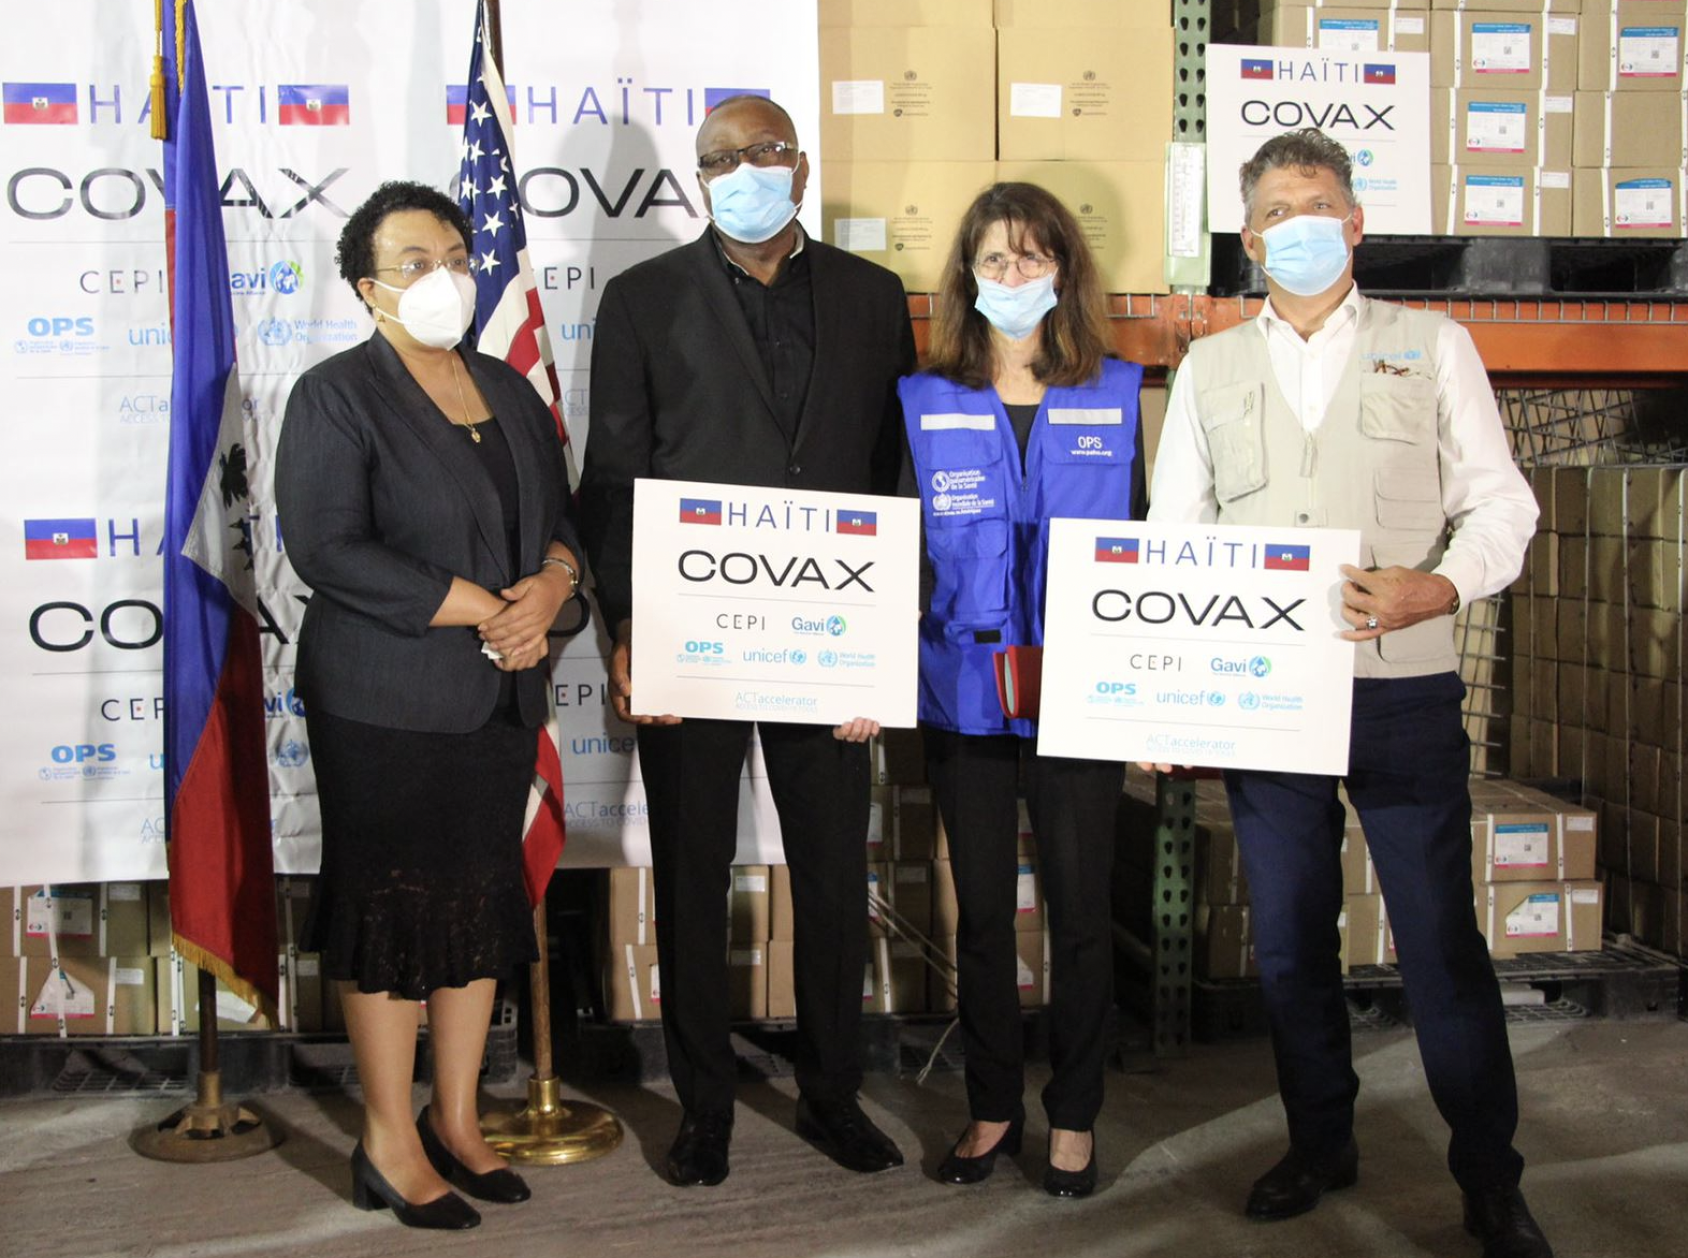 Four people hold COVAX signs in front of the flags of Haiti and United States.